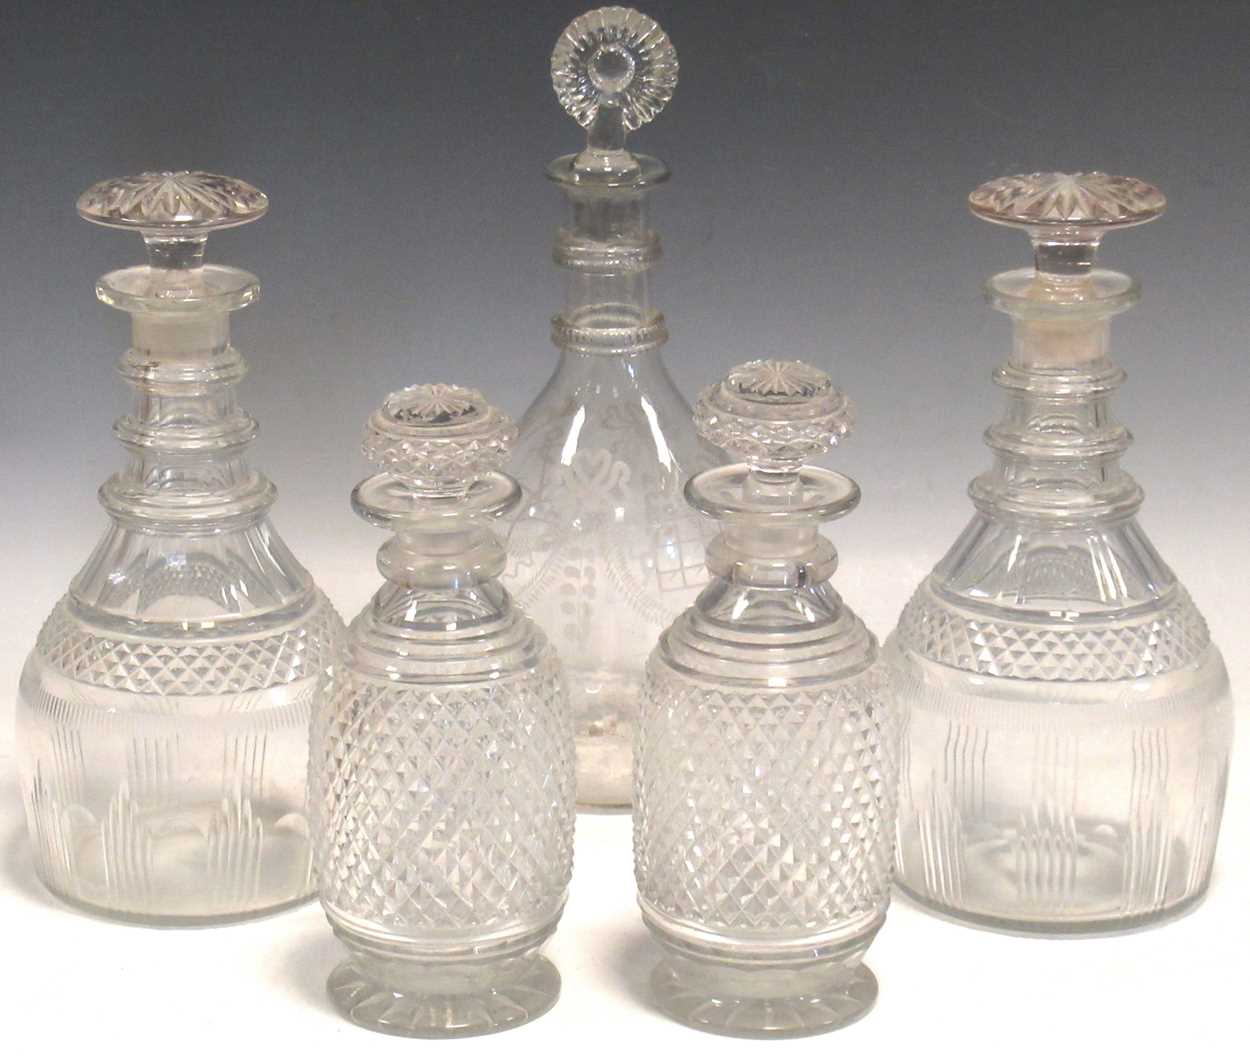 A near pair of 19th century hobnail cut decanters and stoppers; a pair of George III decanters and